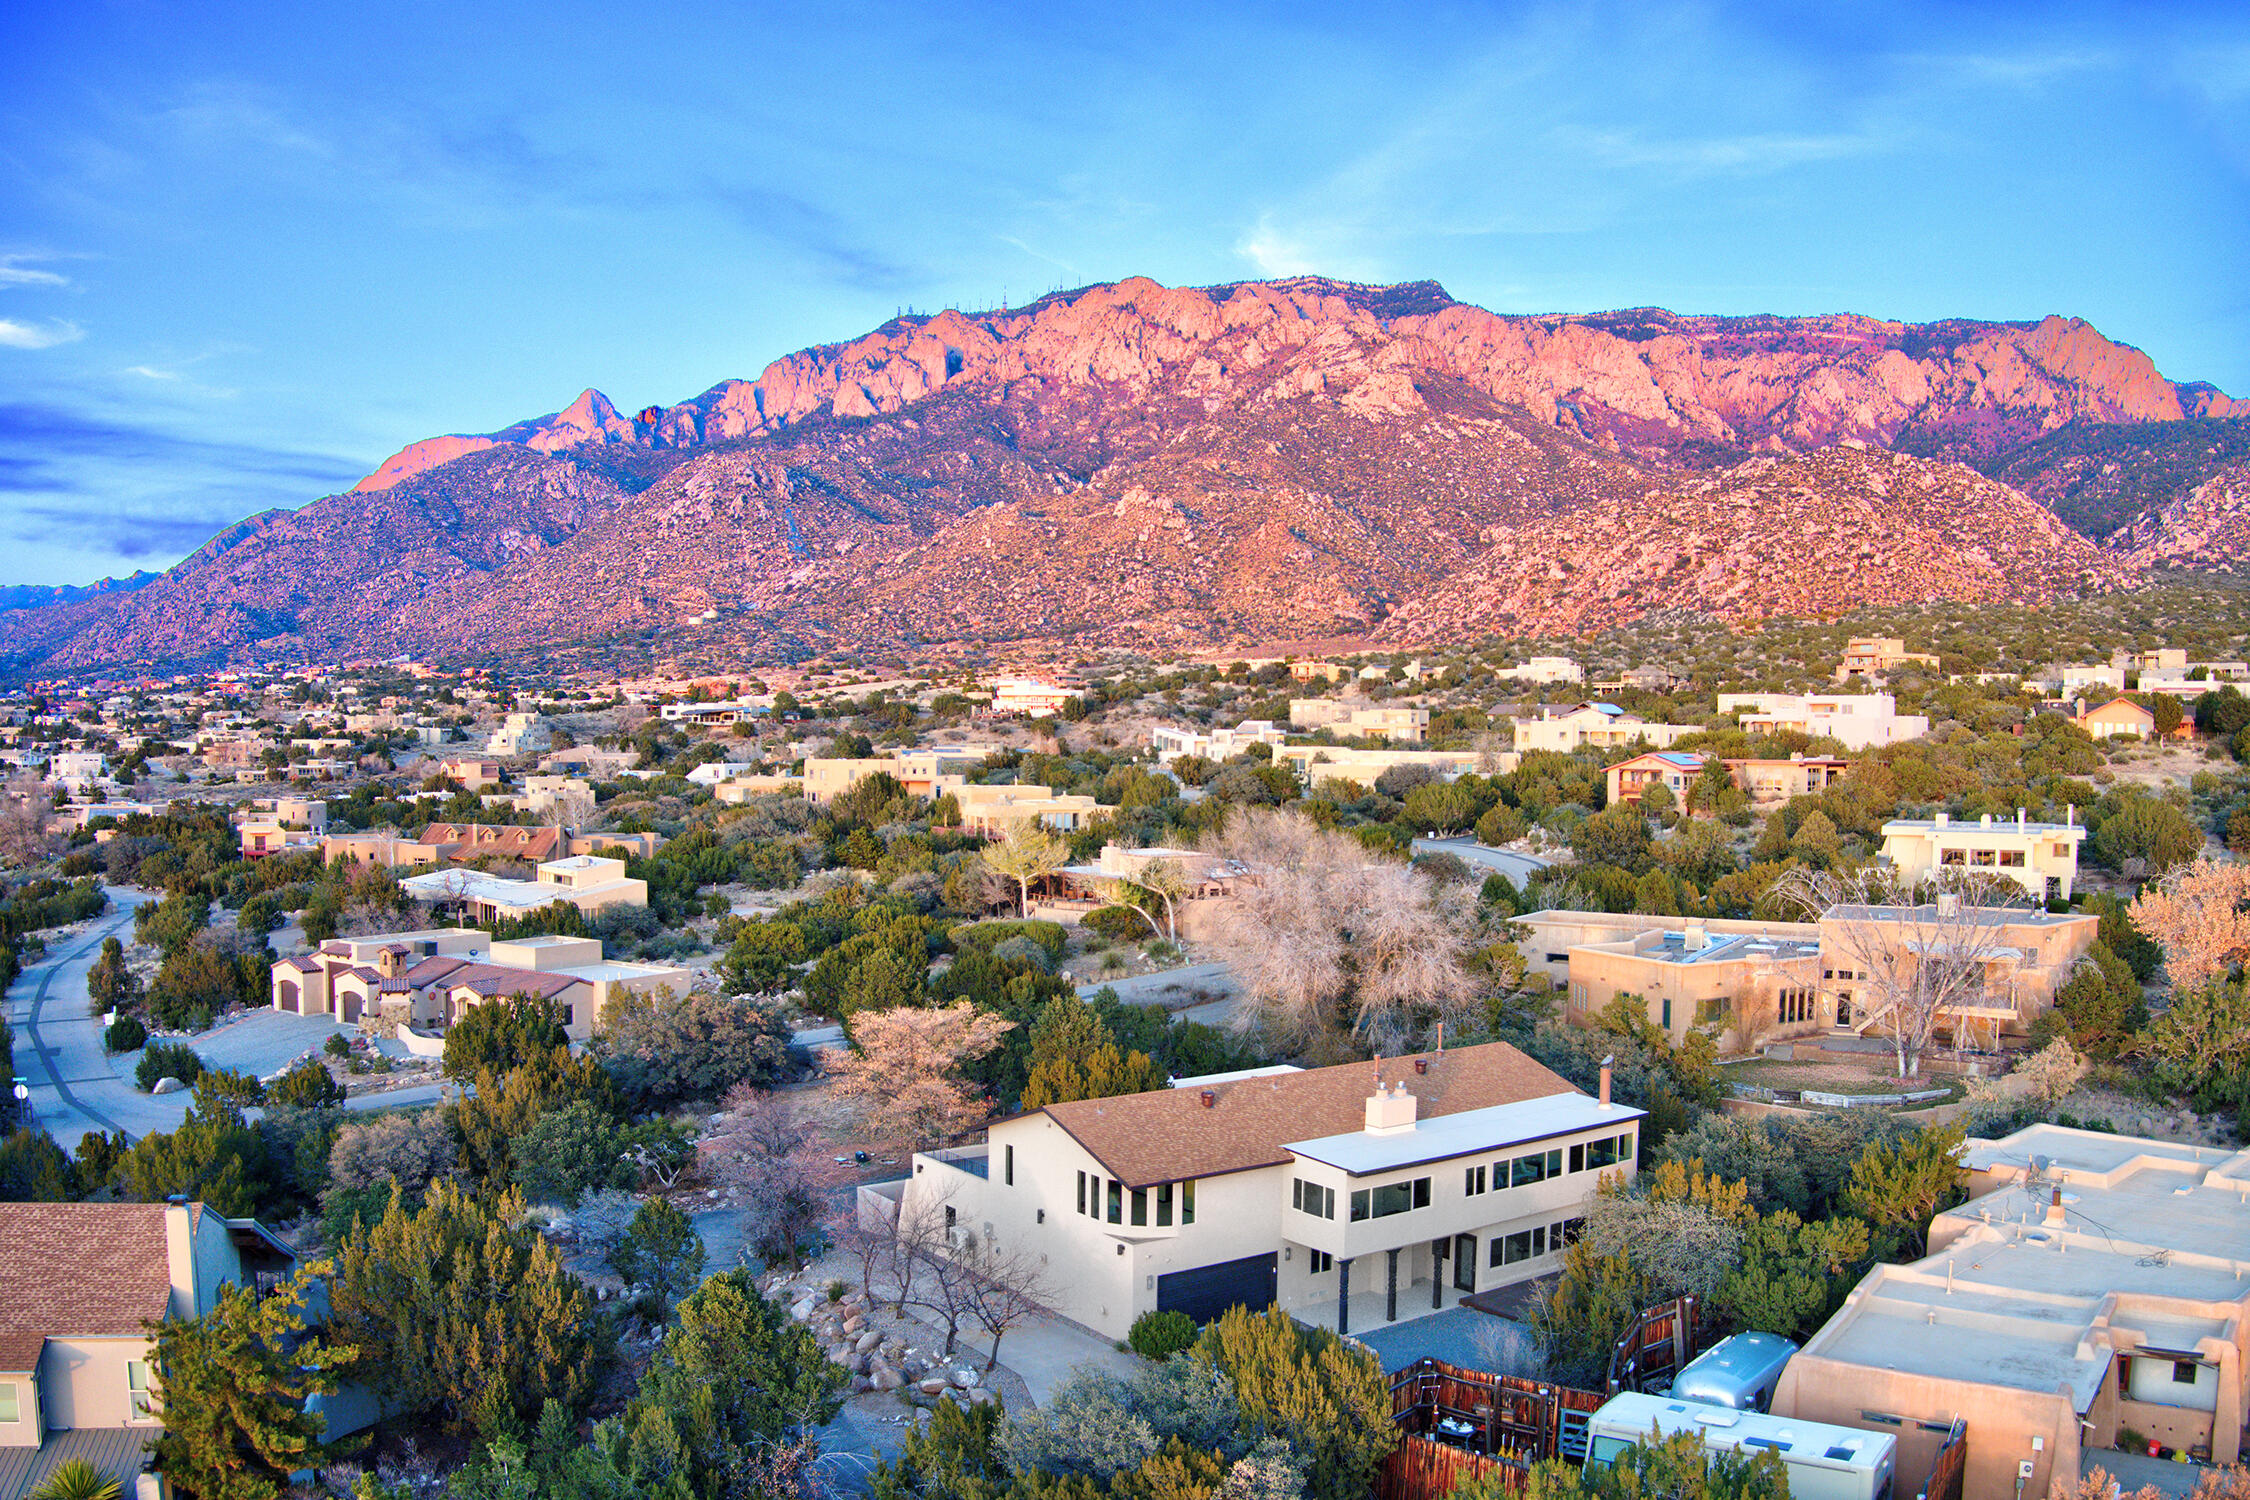 ***OPEN HOUSE Sat & Sun 12/3 & 12/4 1pm-3pm*** World class; everything a luxury home should be! Come experience the pinnacle of fine living perched high in the foothills of the majestic Sandia Mountains overlooking Albuquerque complete w/palatial mountain views capitalized from enormous picture windows. Ascend the road towards the mountain to the residence and you will be delighted by friendly residents walking & waving, half a dozen deer frolicking, and the sweet signature New Mexican aroma from the picturesque Pinon trees. Cross the regal threshold and you will feel the quality. Masterfully-designed floorplan w/guest house, home gym w/shower svc, inspirational office w/outdoor views, big loft & wet bar, luxurious sunroom, and easy-care outdoor living on spacious balconies. SUNSETS GALORE